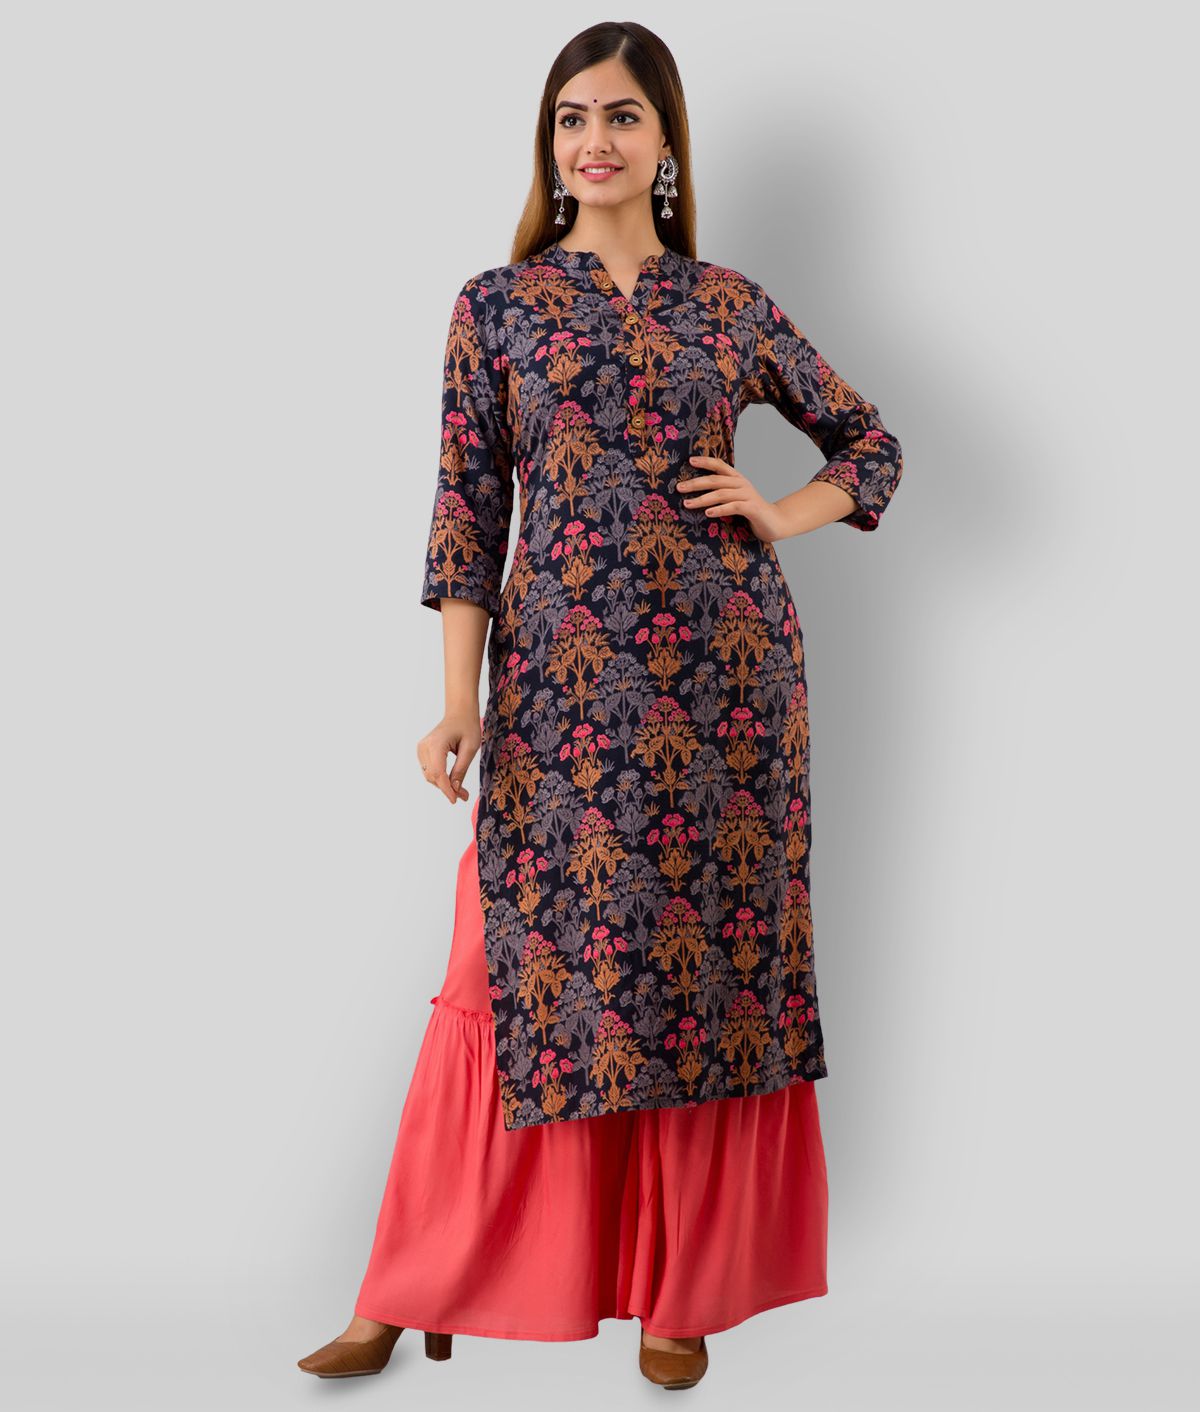     			MAUKA - Multicolor Straight Rayon Women's Stitched Salwar Suit ( Pack of 1 )